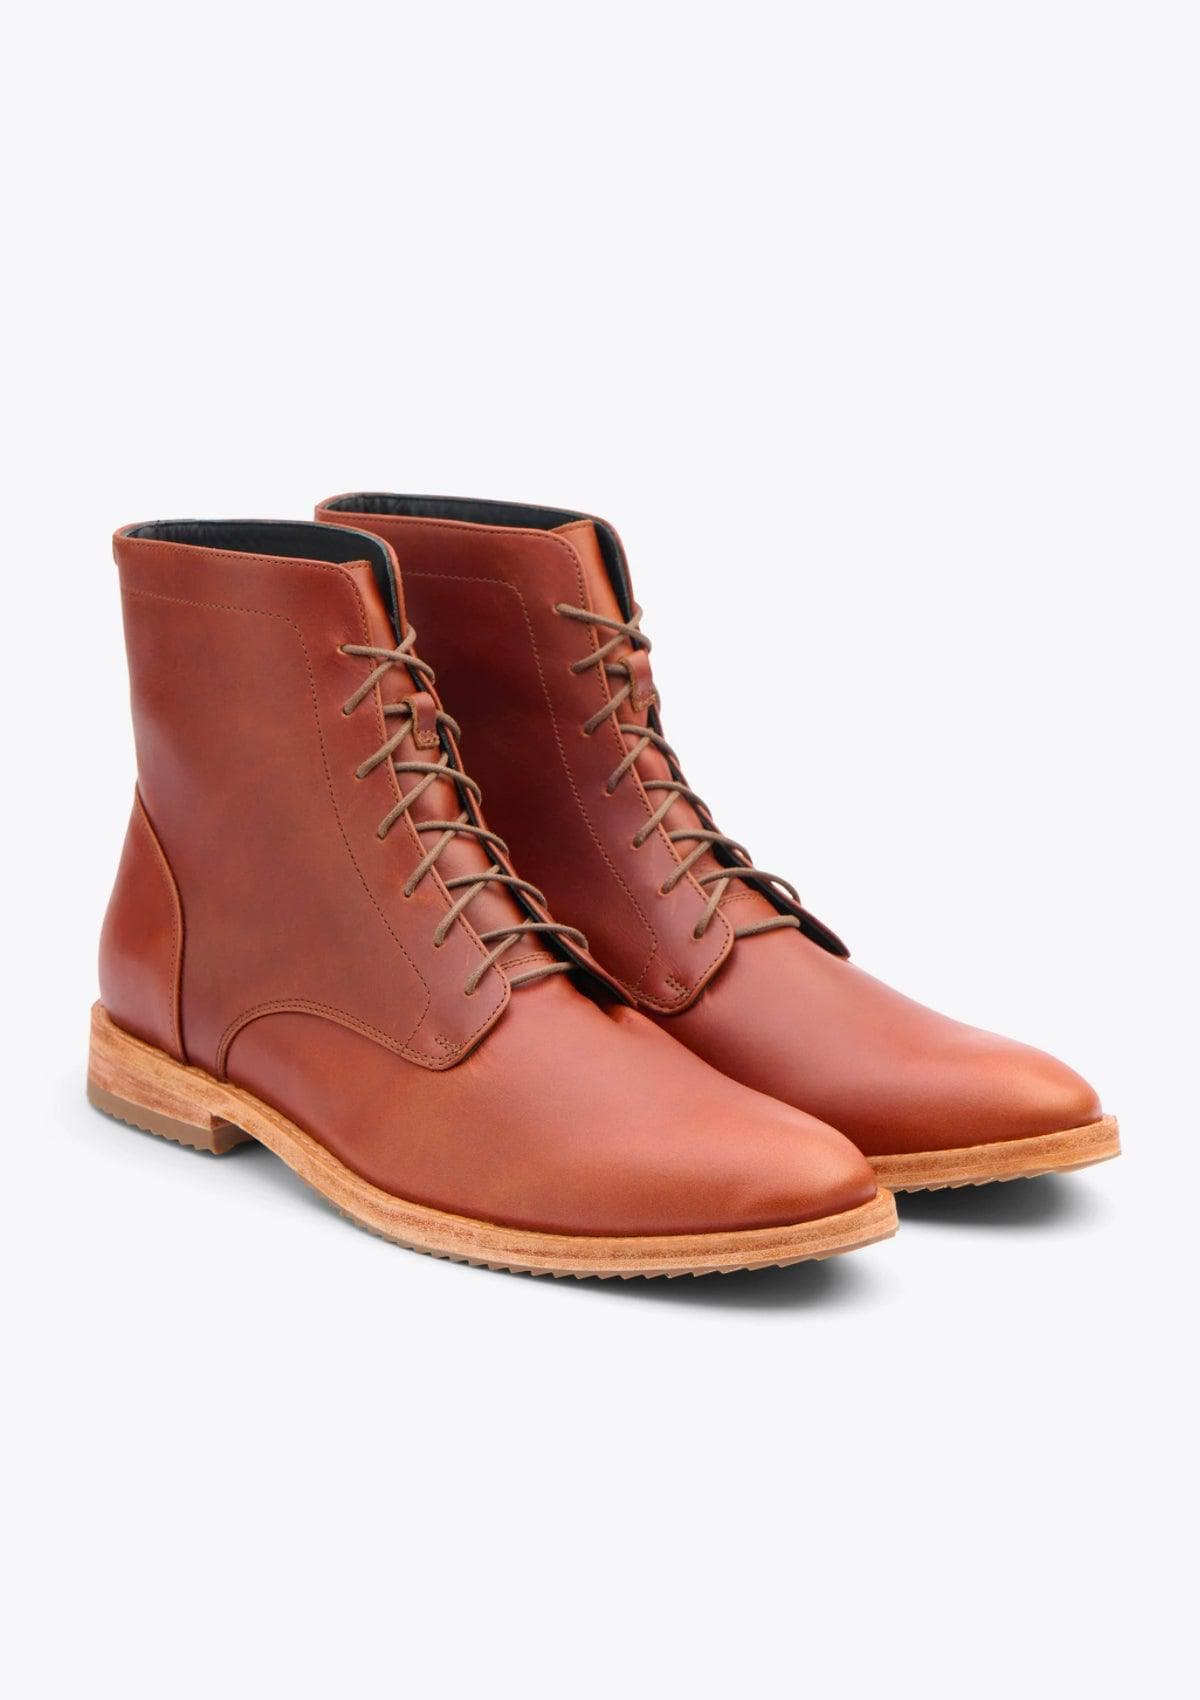 Nisolo Everyday Lace Up Boot - Brandy